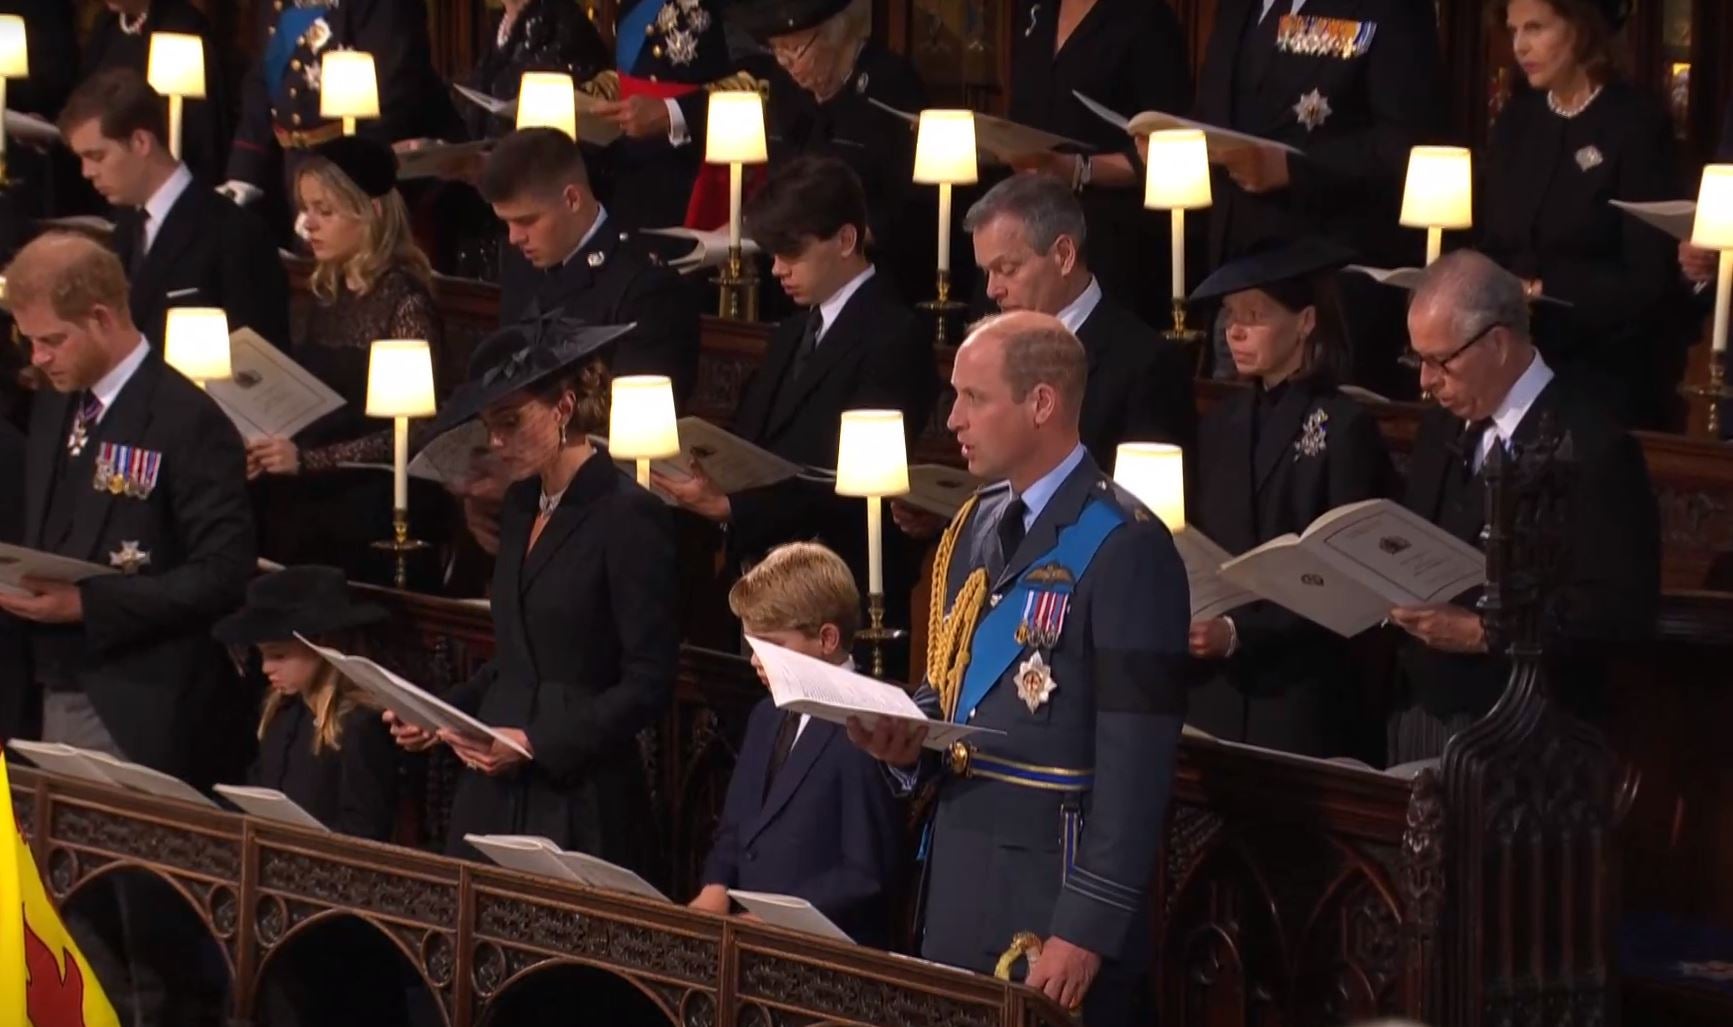 Prince William, Harry, Kate and George at the final public service for the Queen